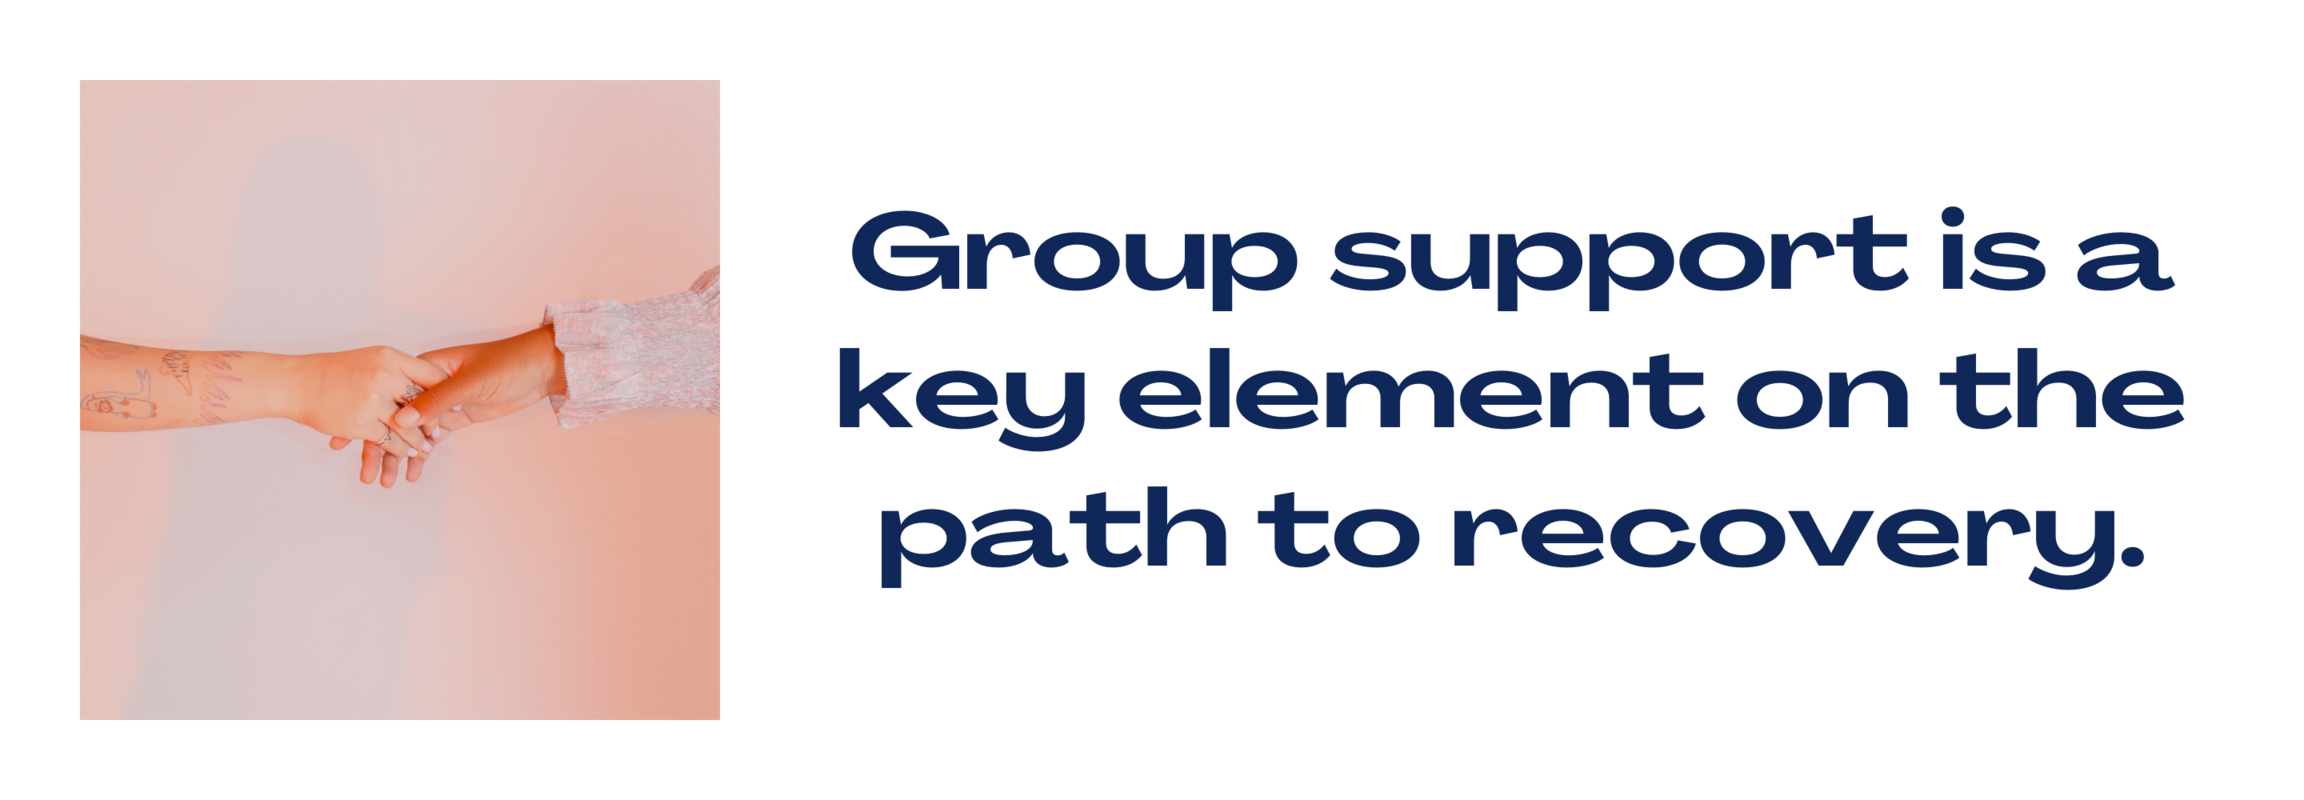 Group support is a key element on the path to recovery.